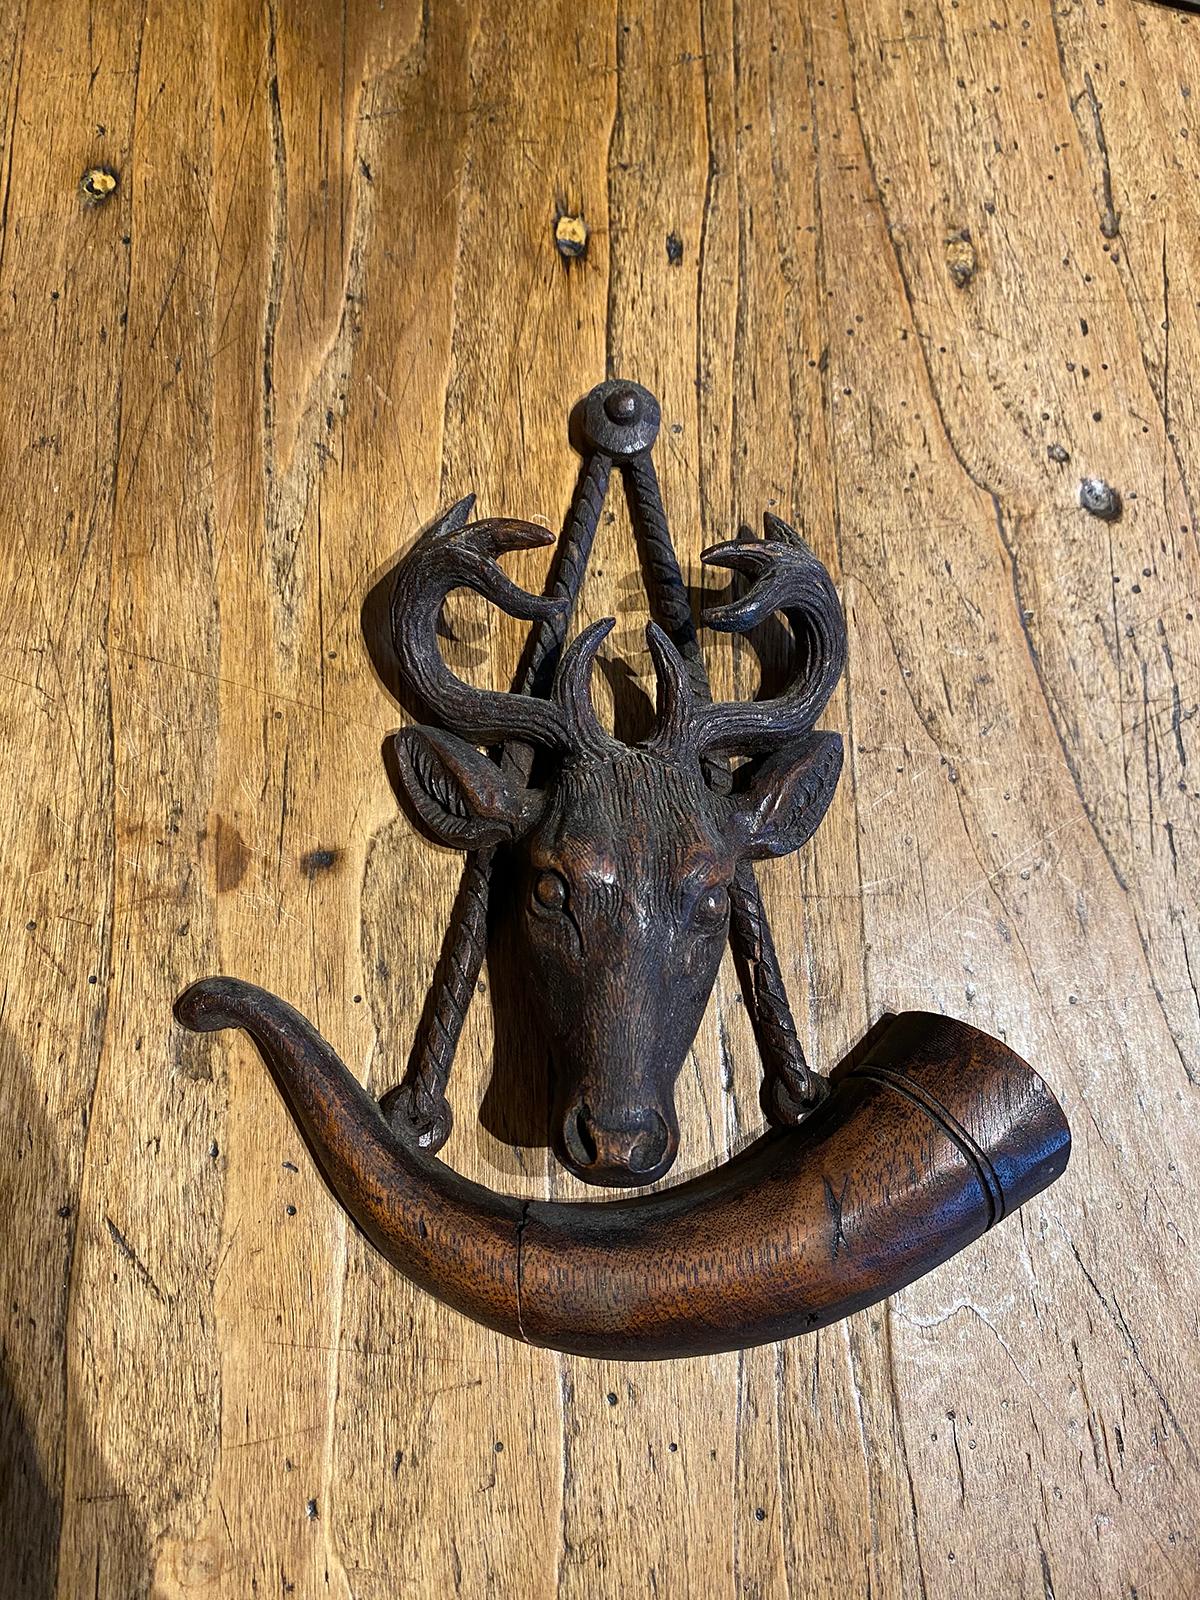 19th-early 20th century carved Black Forest deer head with horn
One antler needs repair - see additional photos.